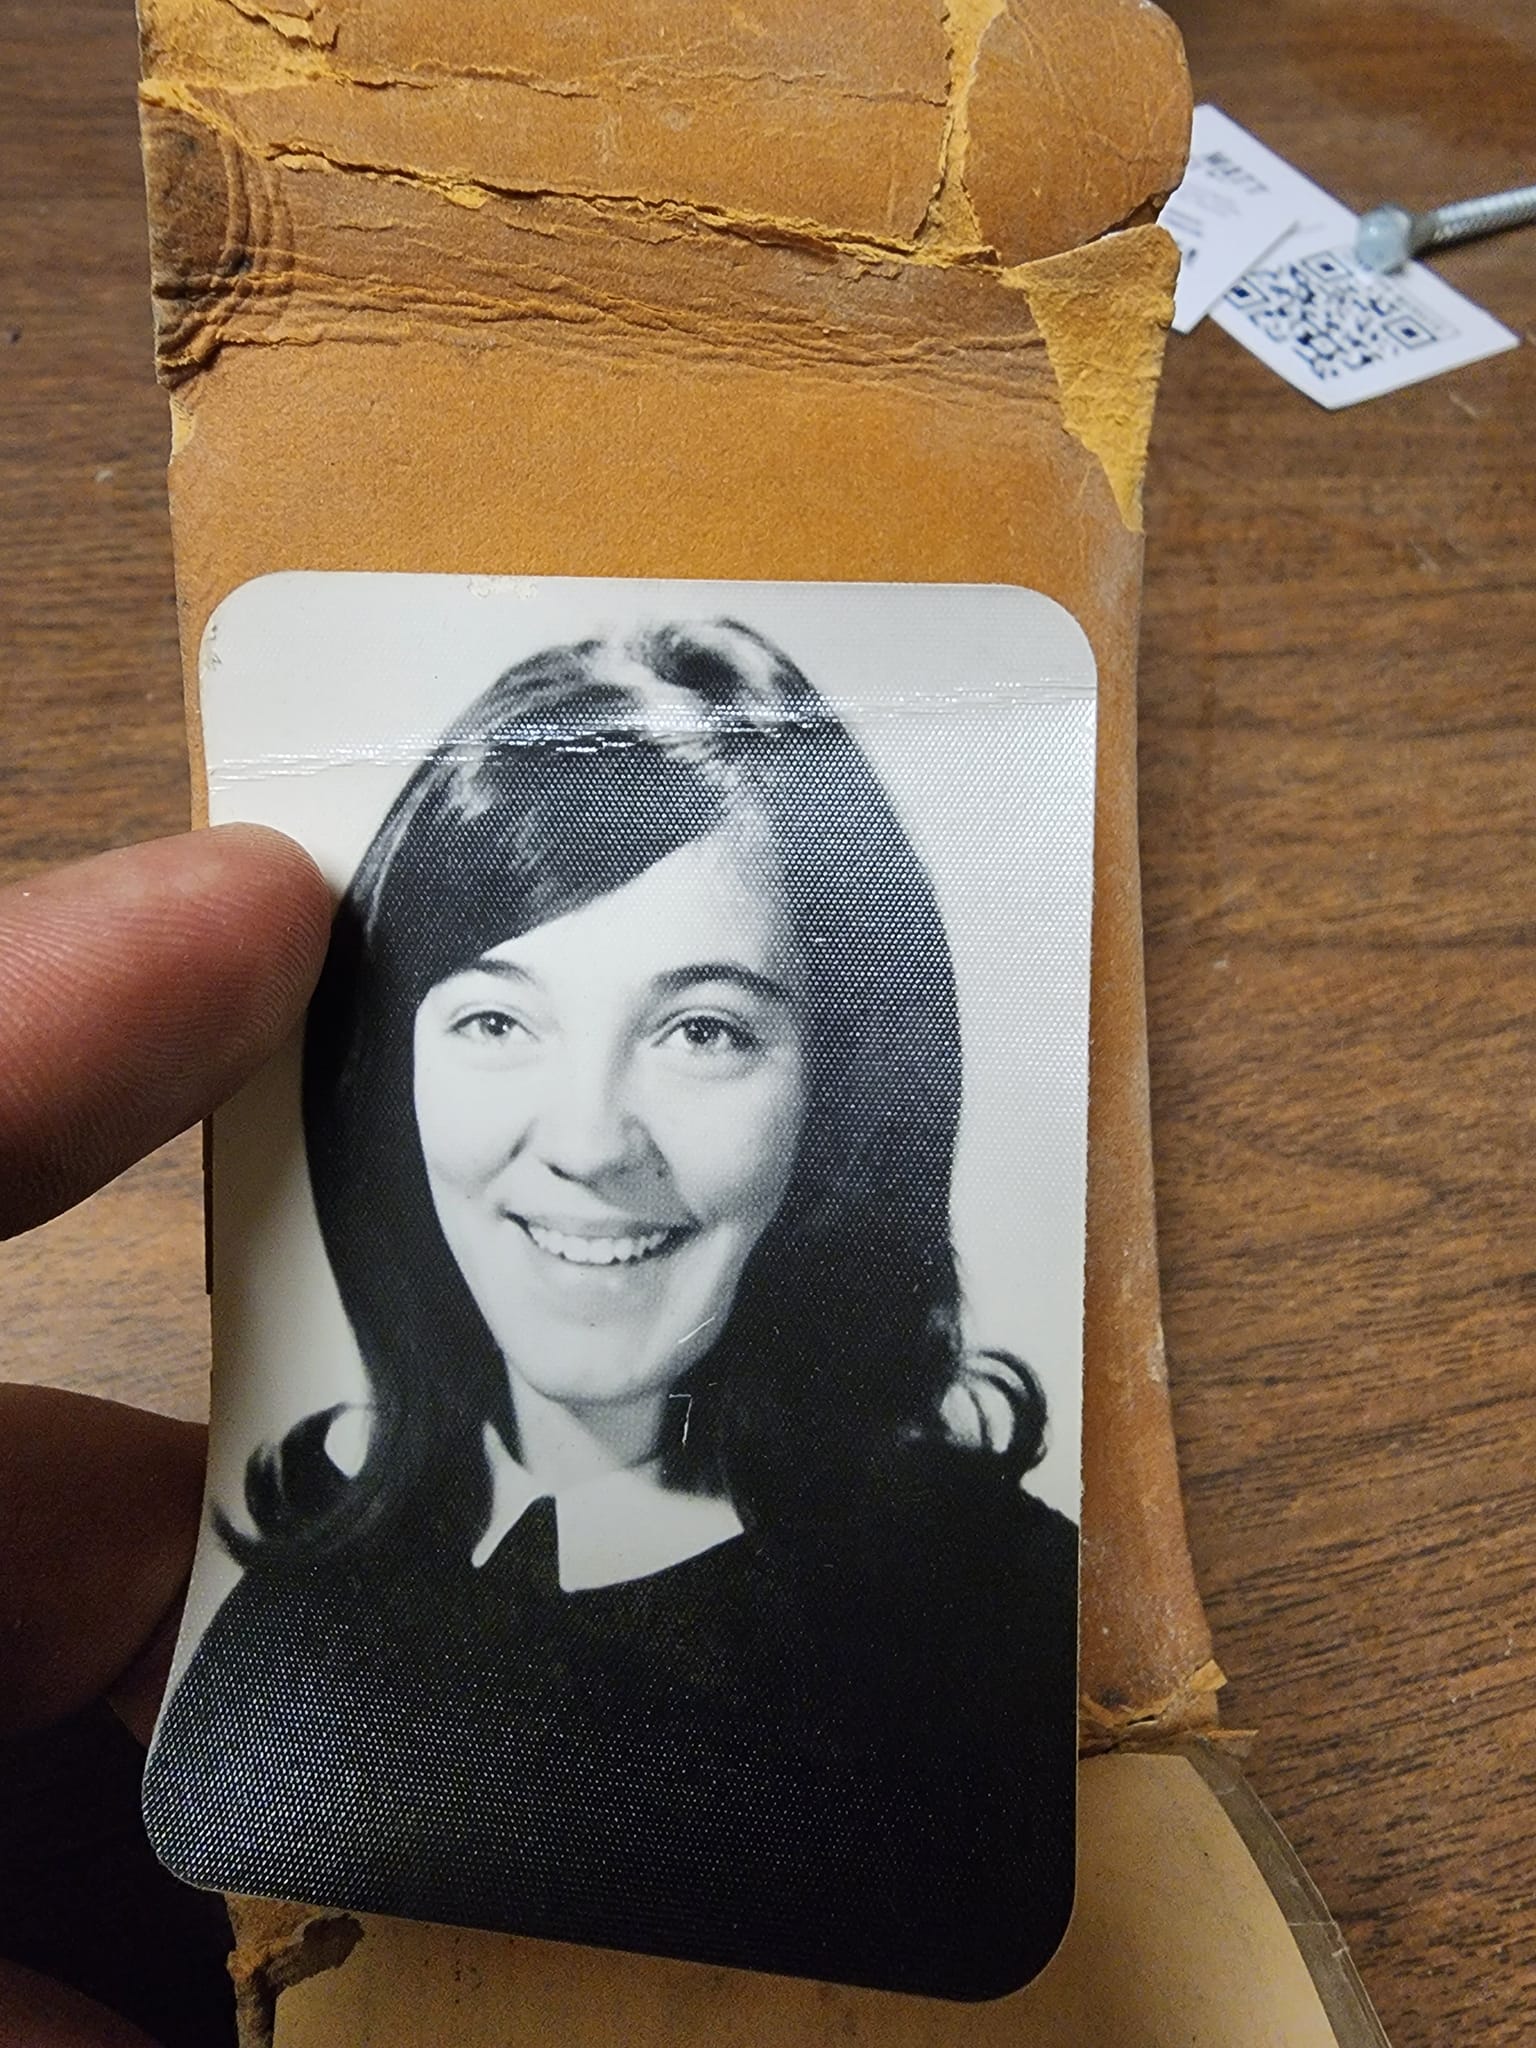 photograph from Sharon Day's wallet that was lost in 1968.